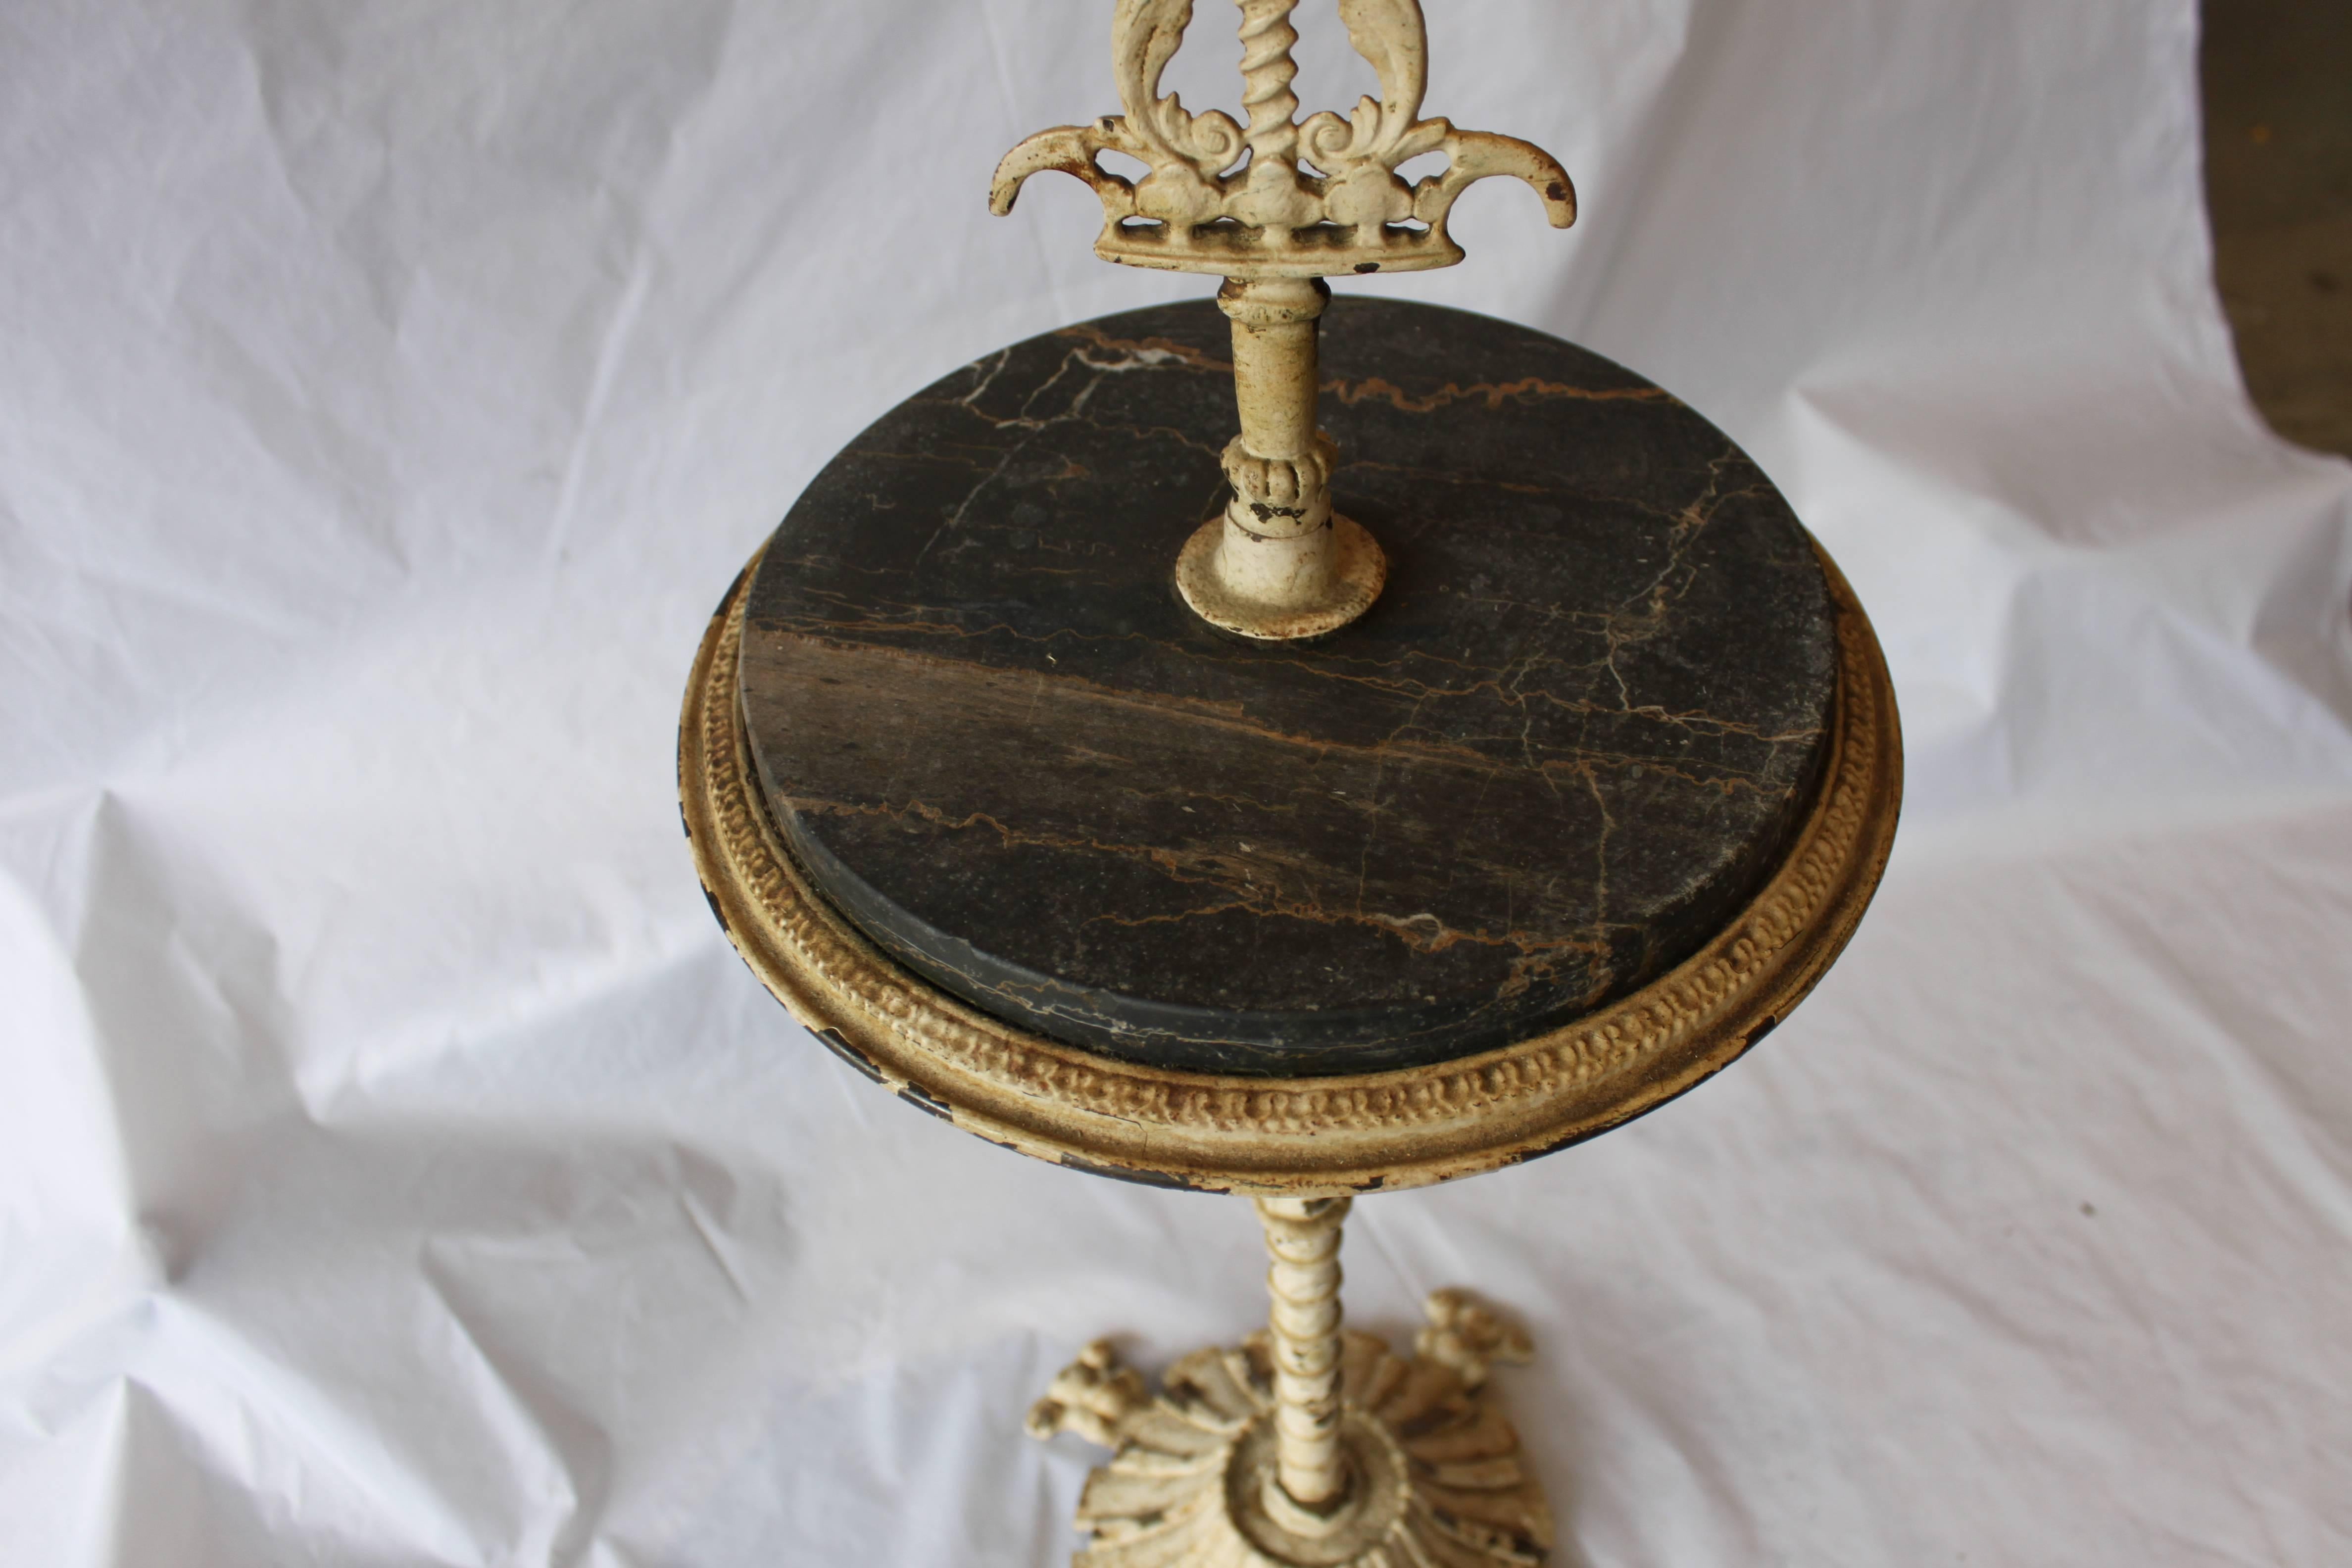 19th century cast iron stand with black marble top. All original. Stand height to top of marble is 23